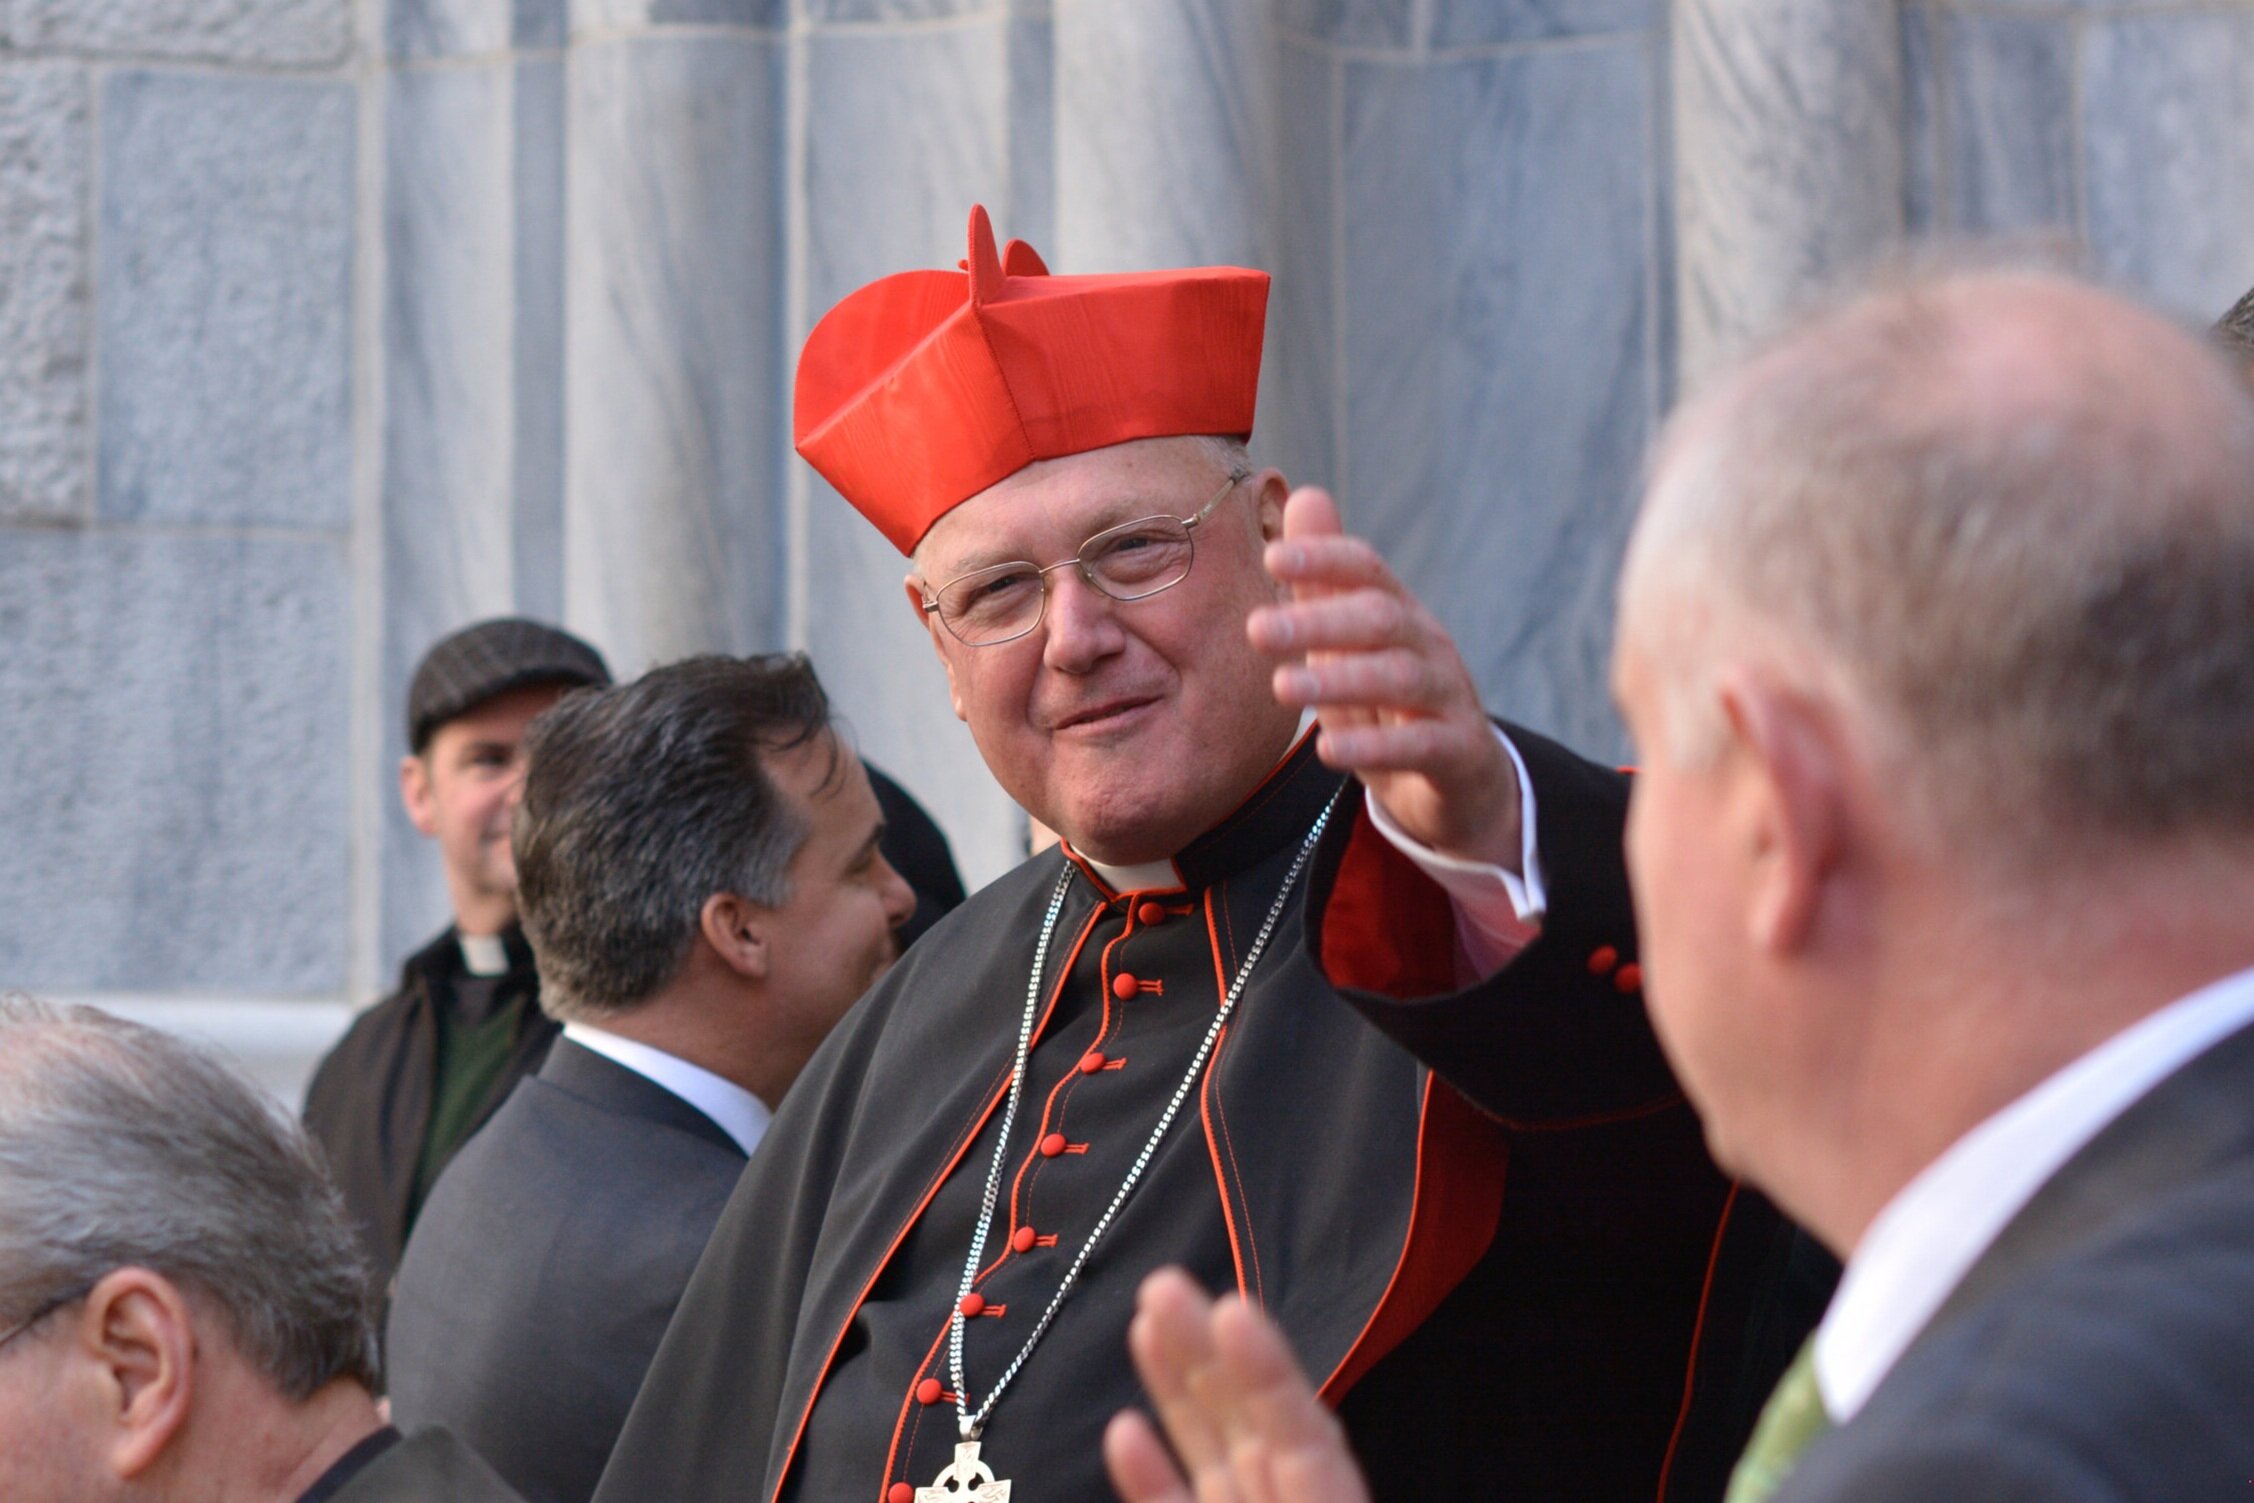 Featured image for “Cardinal Dolan Makes a Cogent Case Against the Equality Act”